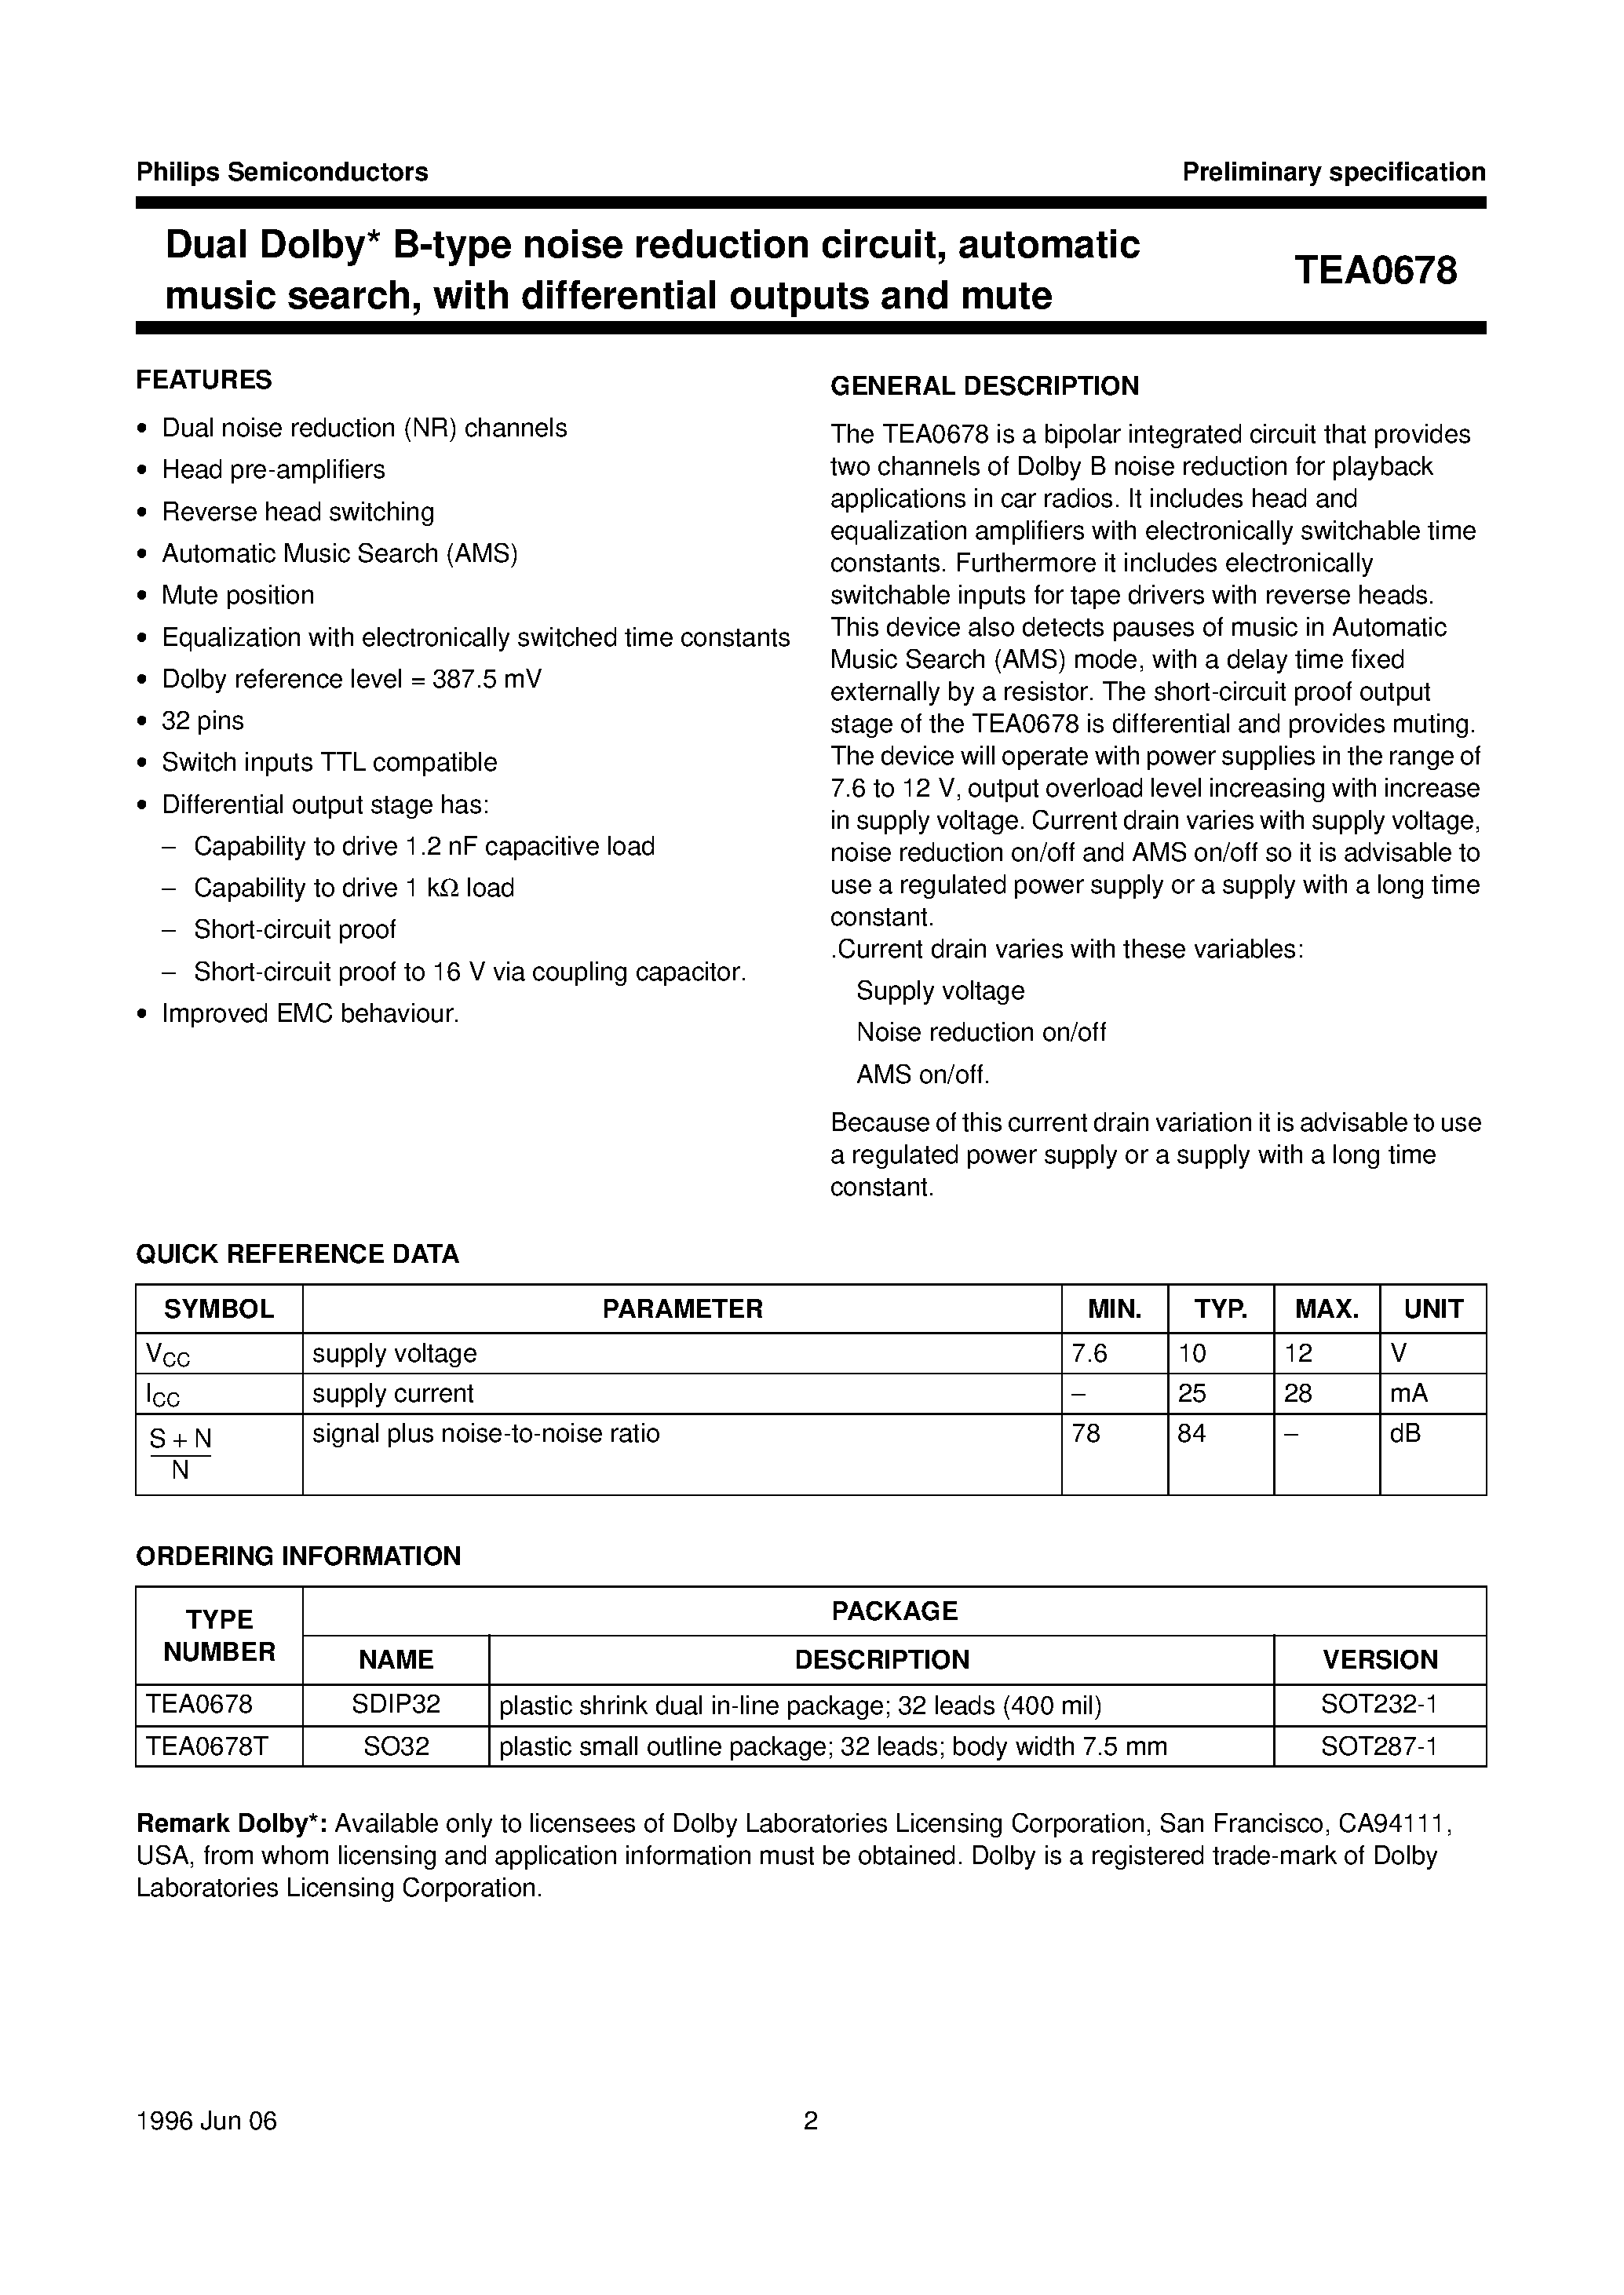 Datasheet TEA0678 - Dual Dolby* B-type noise reduction circuit/ automatic music search/ with differential outputs and mute page 2